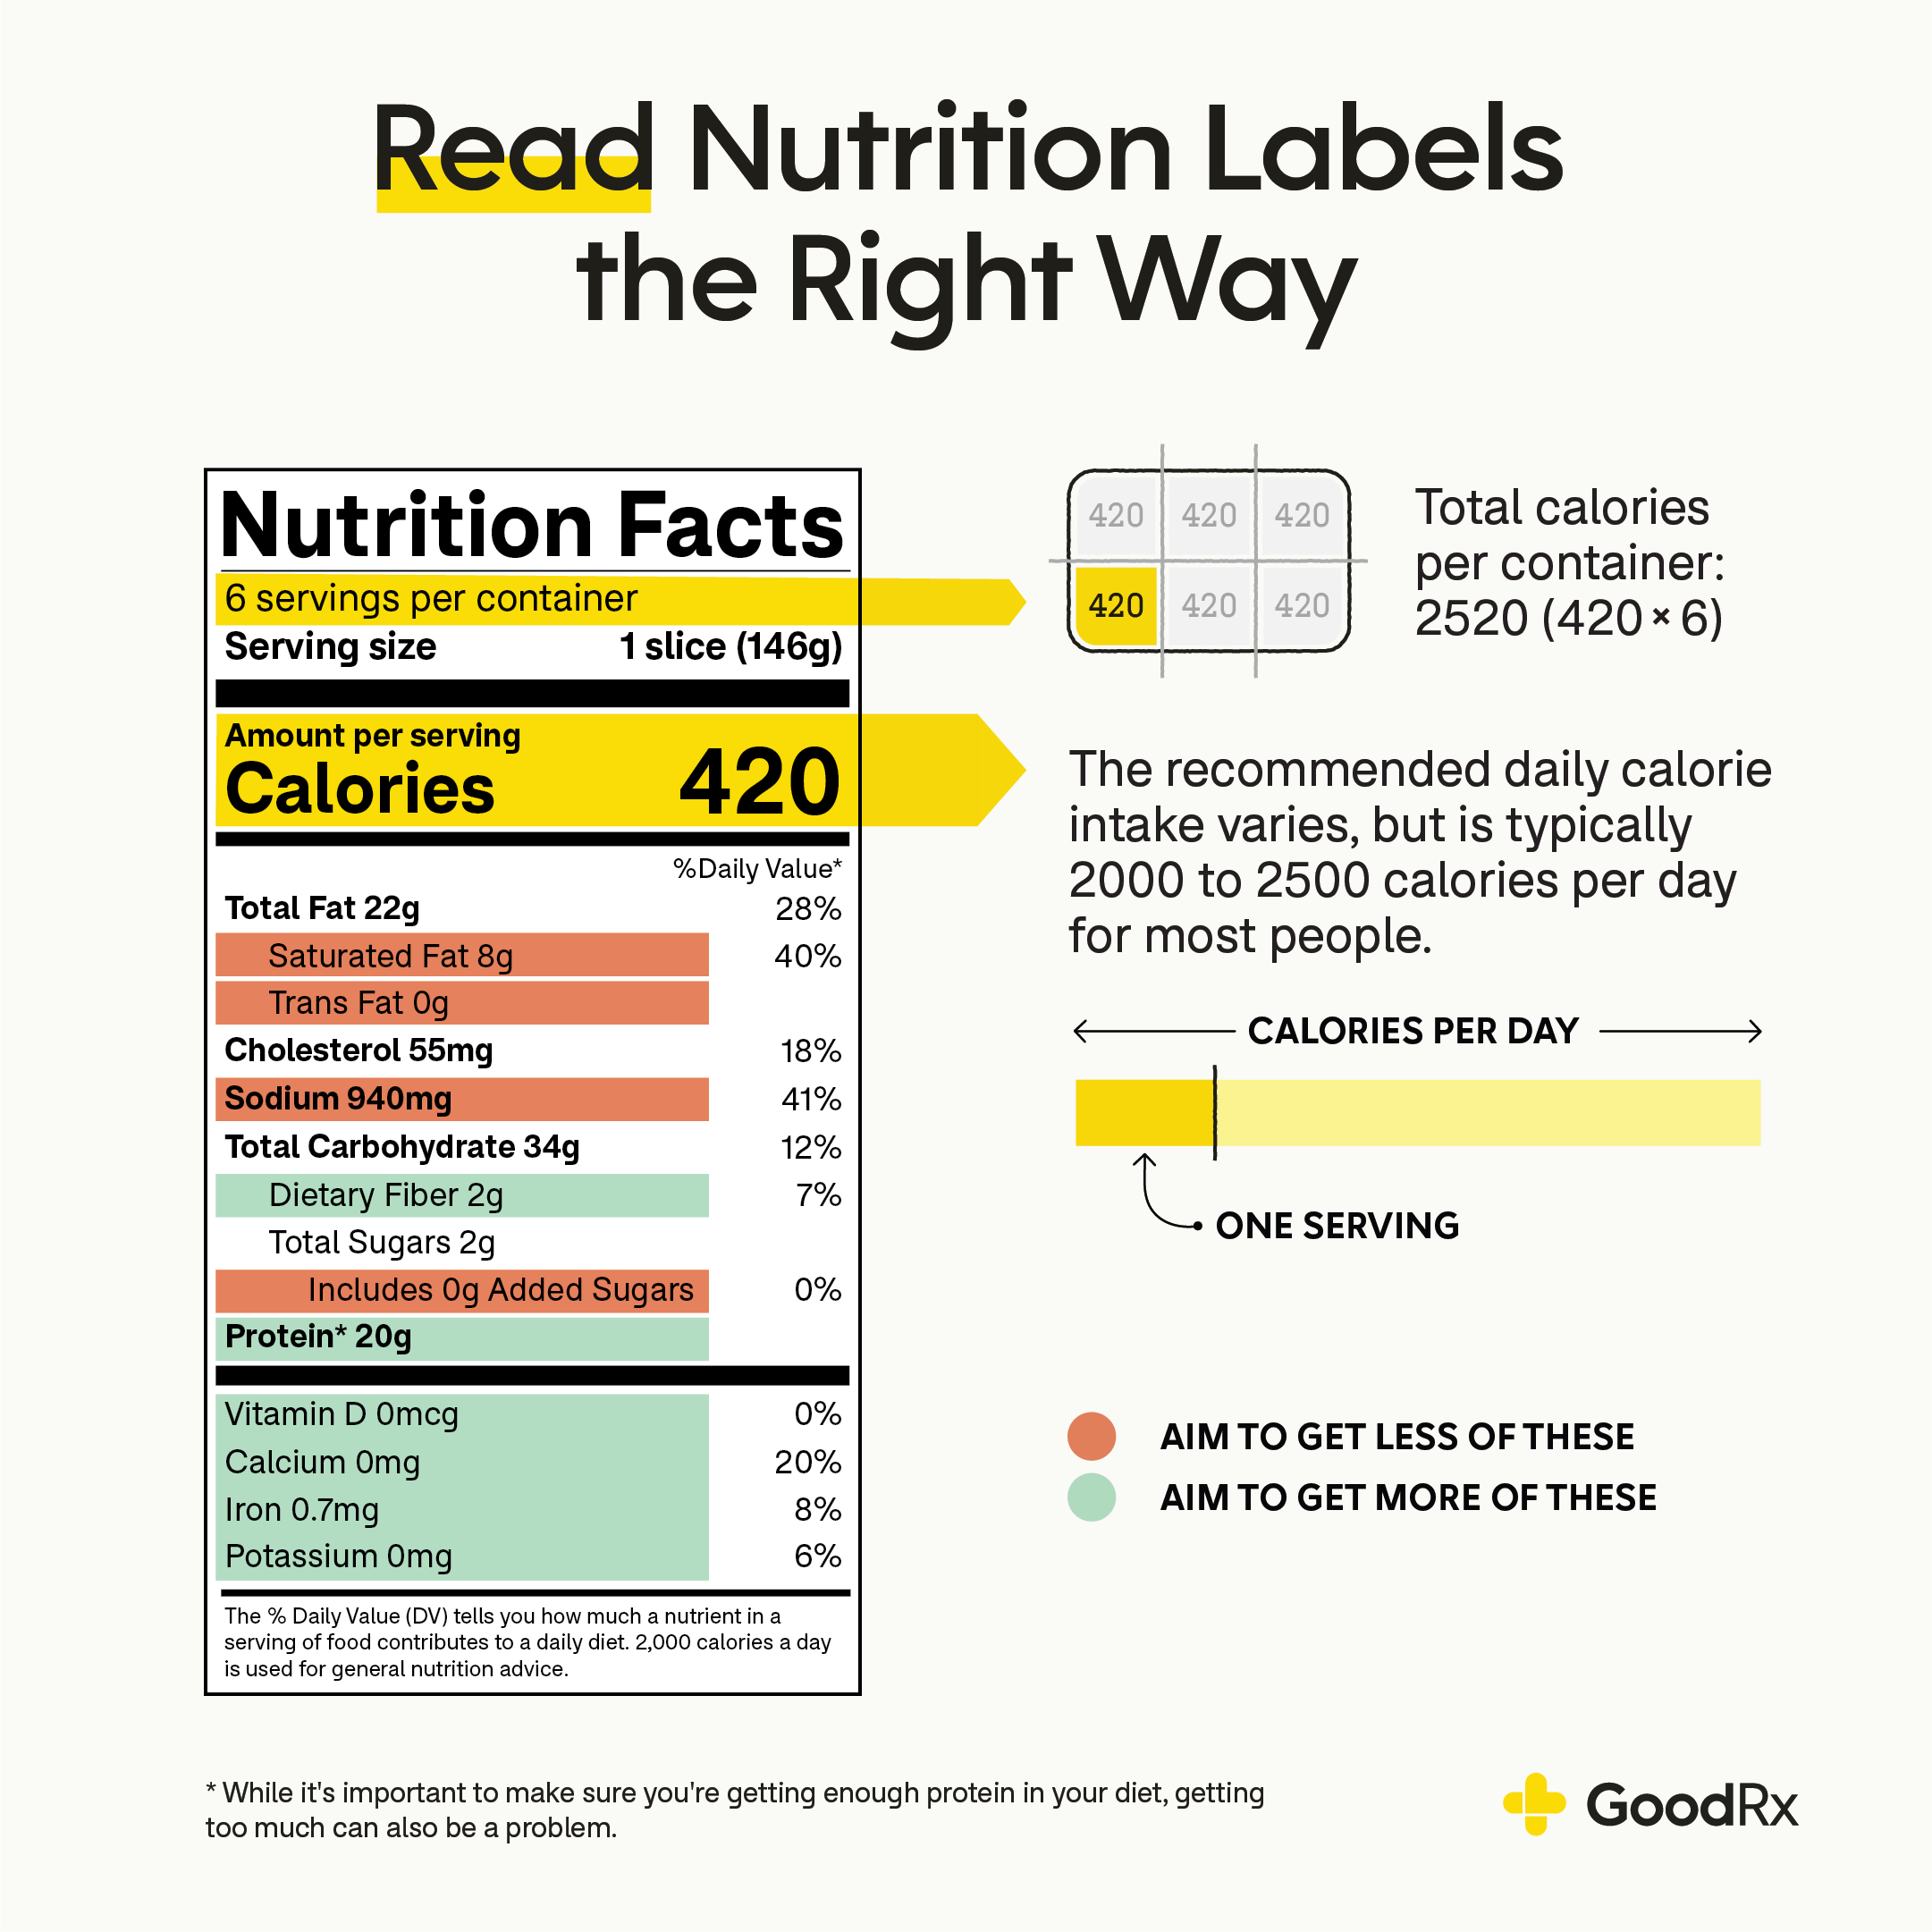 What to Know About Reading Nutrition Labels - GoodRx